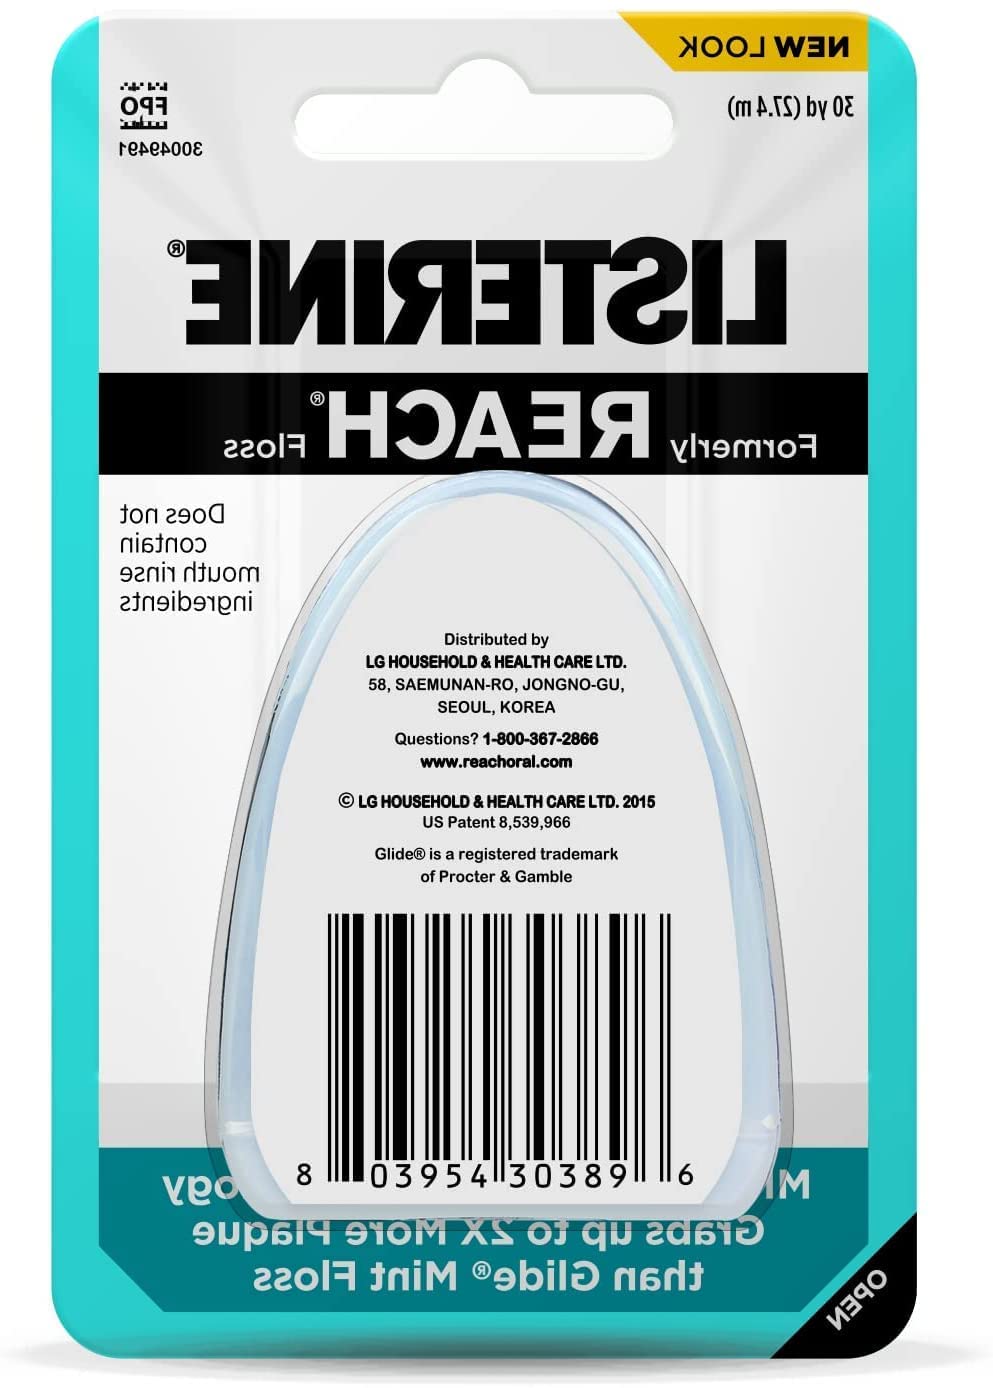 Listerine Ultraclean Dental Floss, Oral Care, Mint-Flavored, 1 Count (Pack of 7)